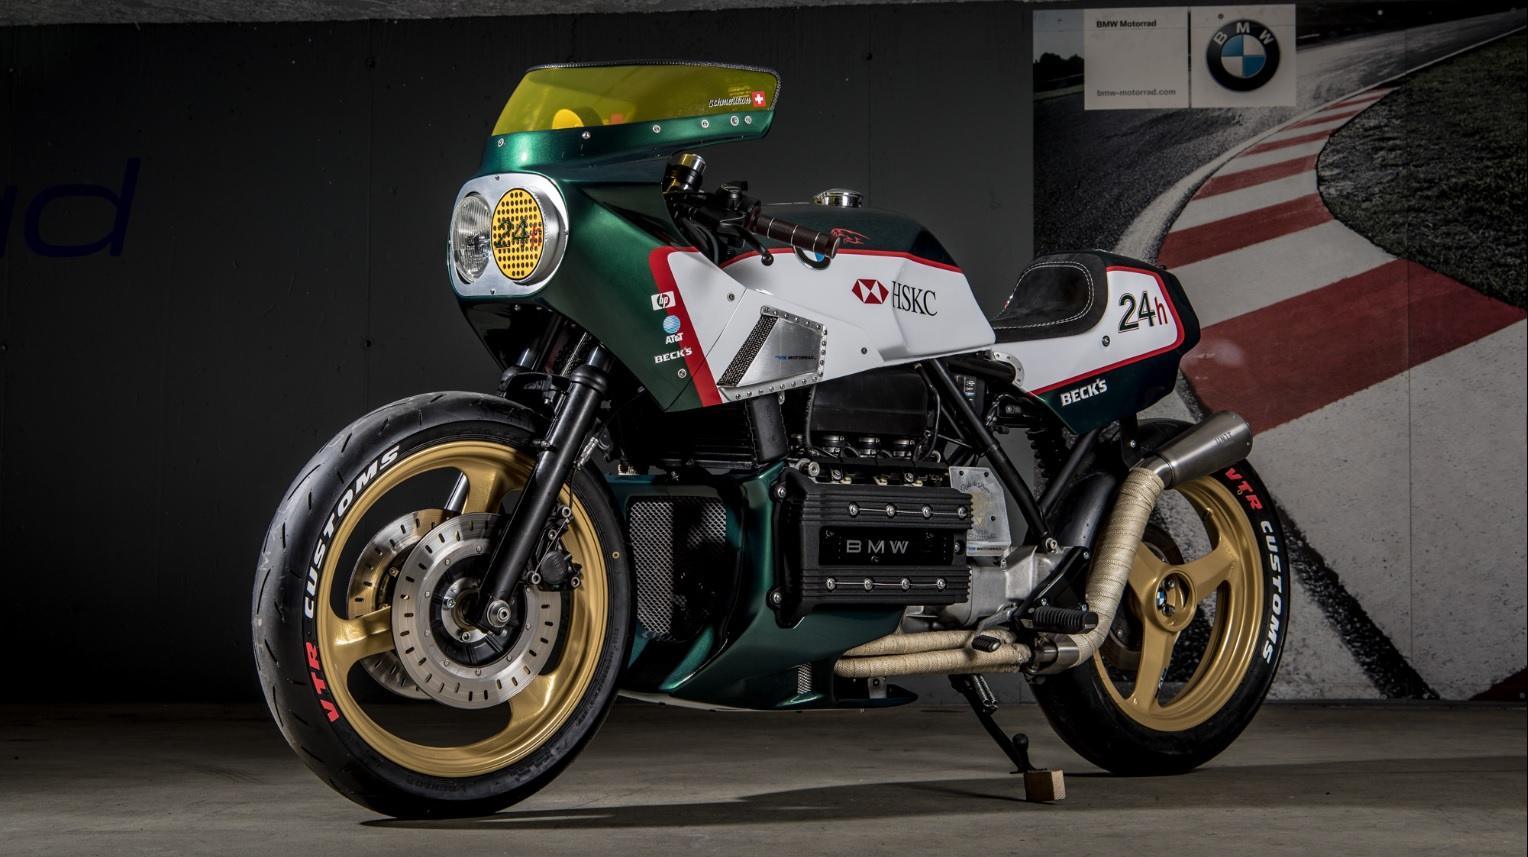 BMW K100 RS “24 hours”